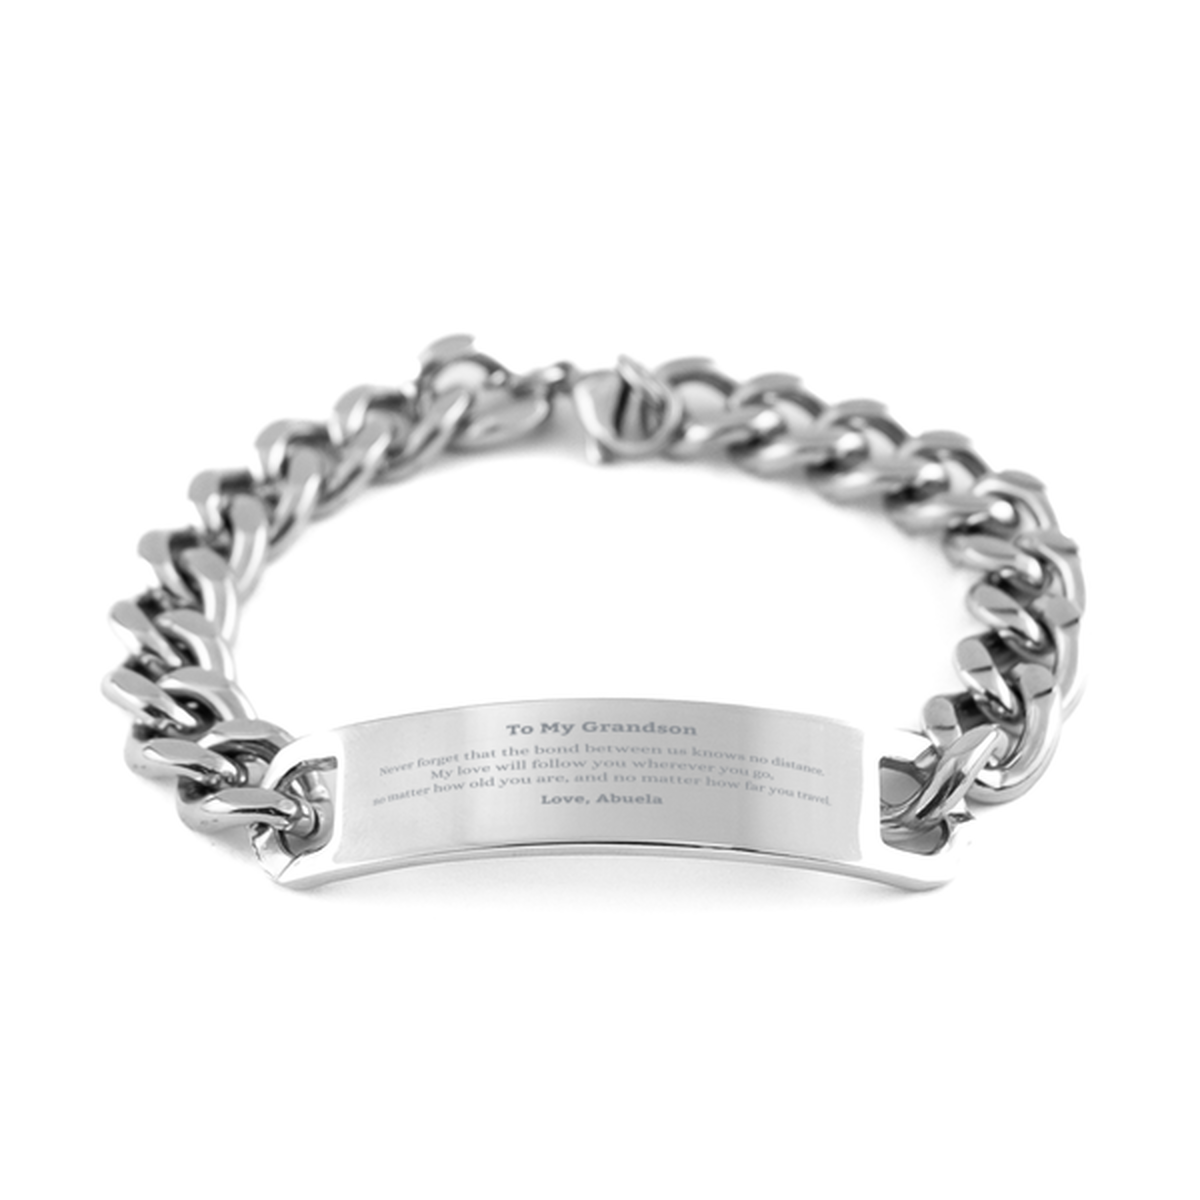 Grandson Birthday Gifts from Abuela, Adjustable Cuban Chain Stainless Steel Bracelet for Grandson Christmas Graduation Unique Gifts Grandson Never forget that the bond between us knows no distance. Love, Abuela